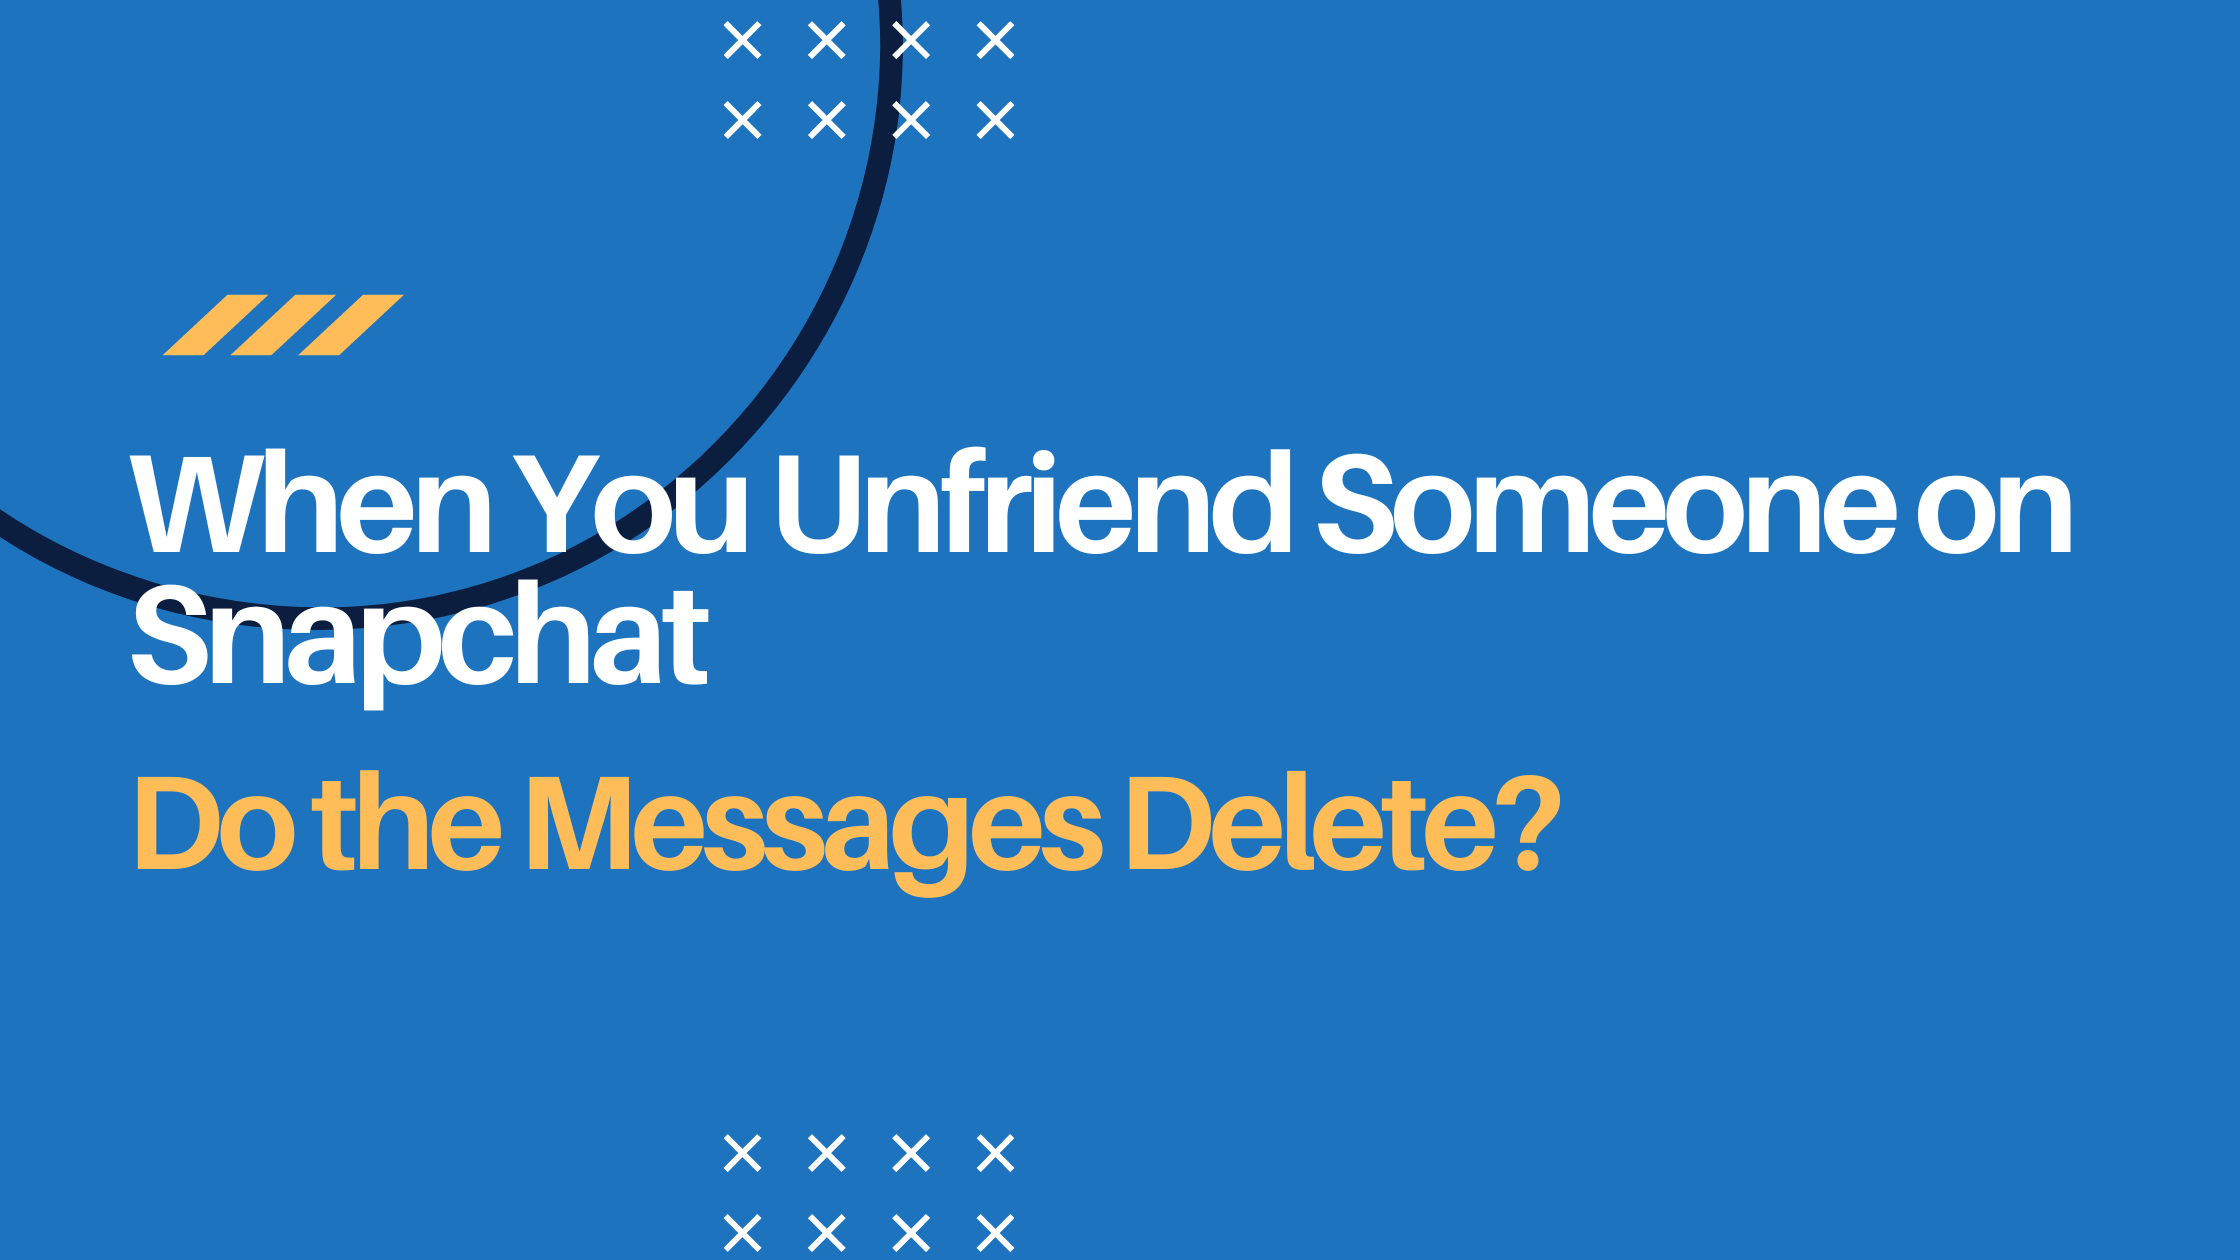 Snapchat is very popular nowadays for social share. However, there may come a time when you wish to sever ties with someone on the app. Unfriending someone on Snapchat does raise the question of what happens to the messages exchanged between the two parties.